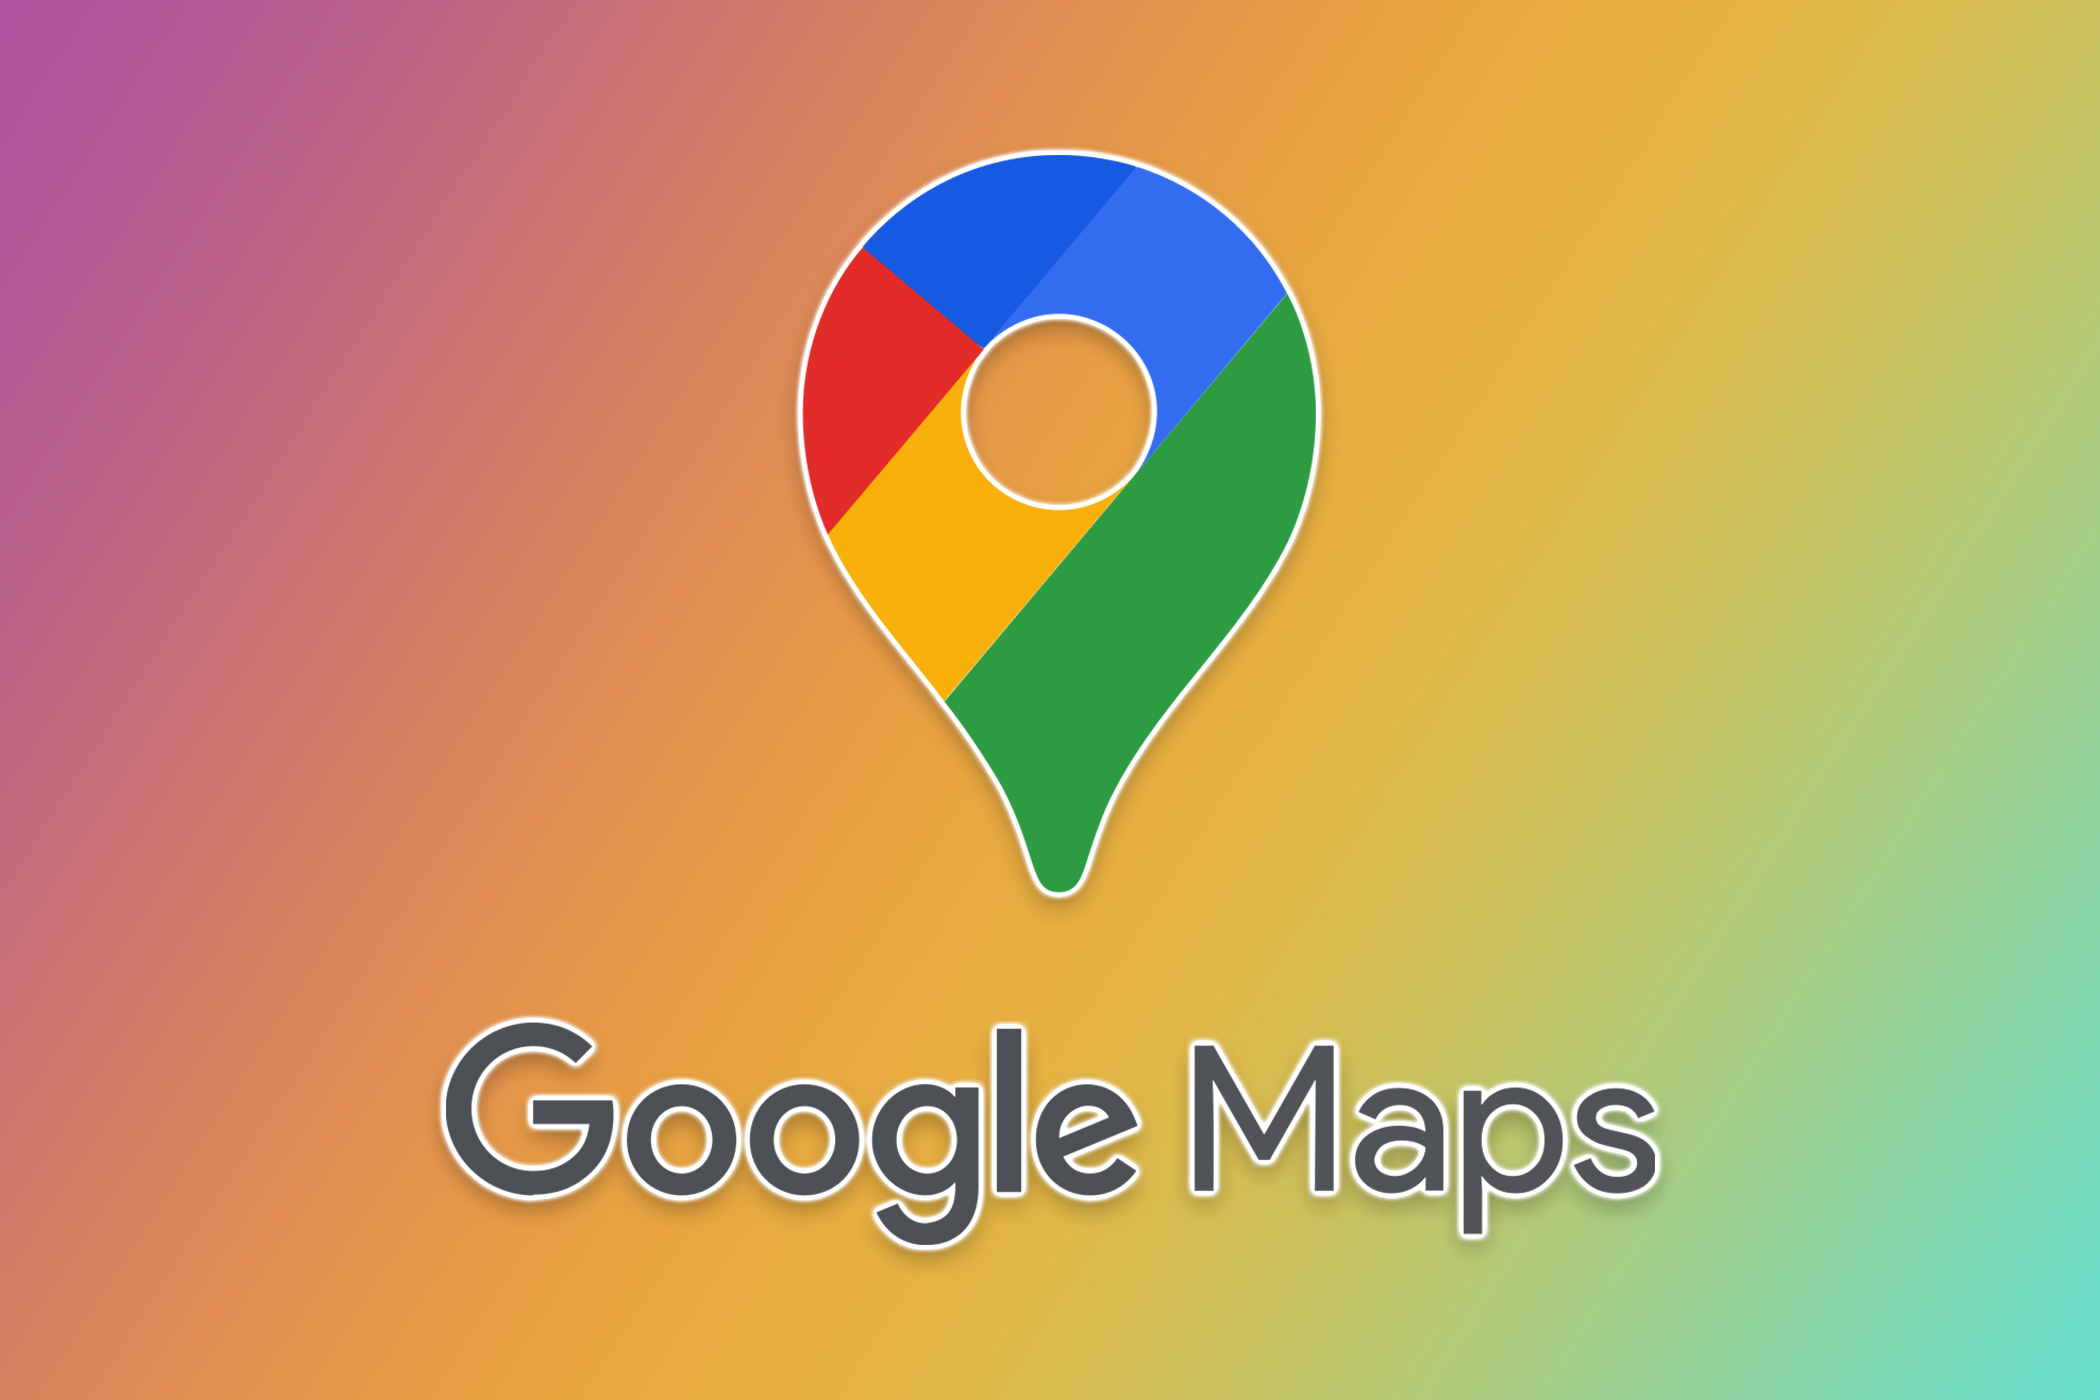 Google Maps logo on a colorful background.